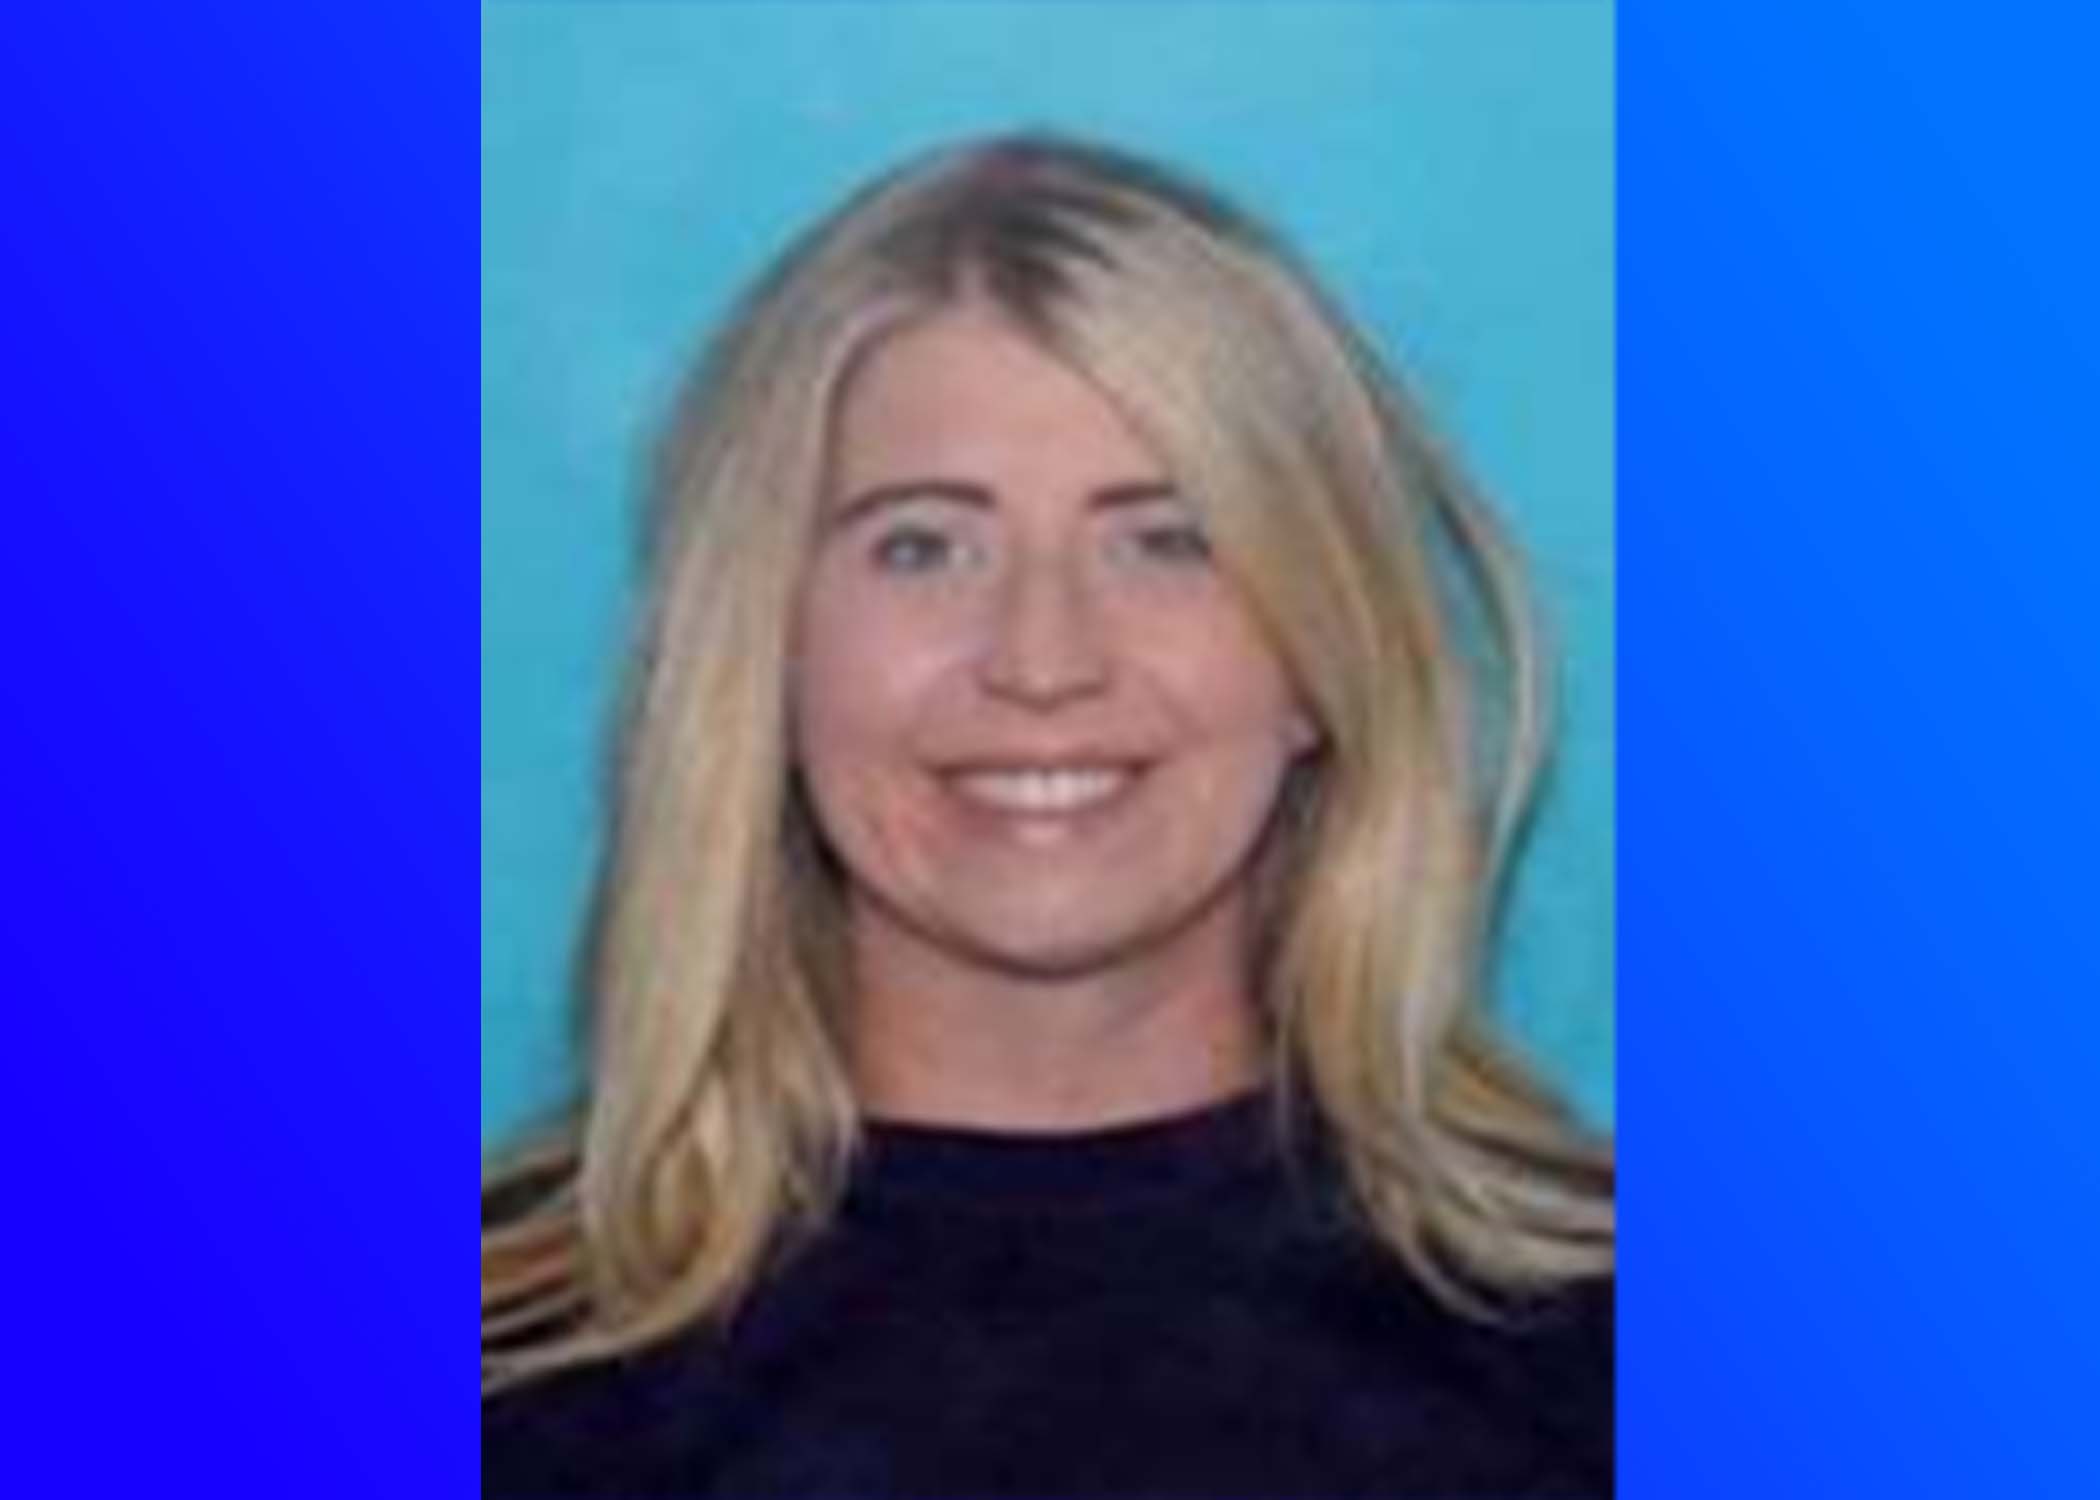 Missing and Endangered Person Alert canceled for Franklin County woman